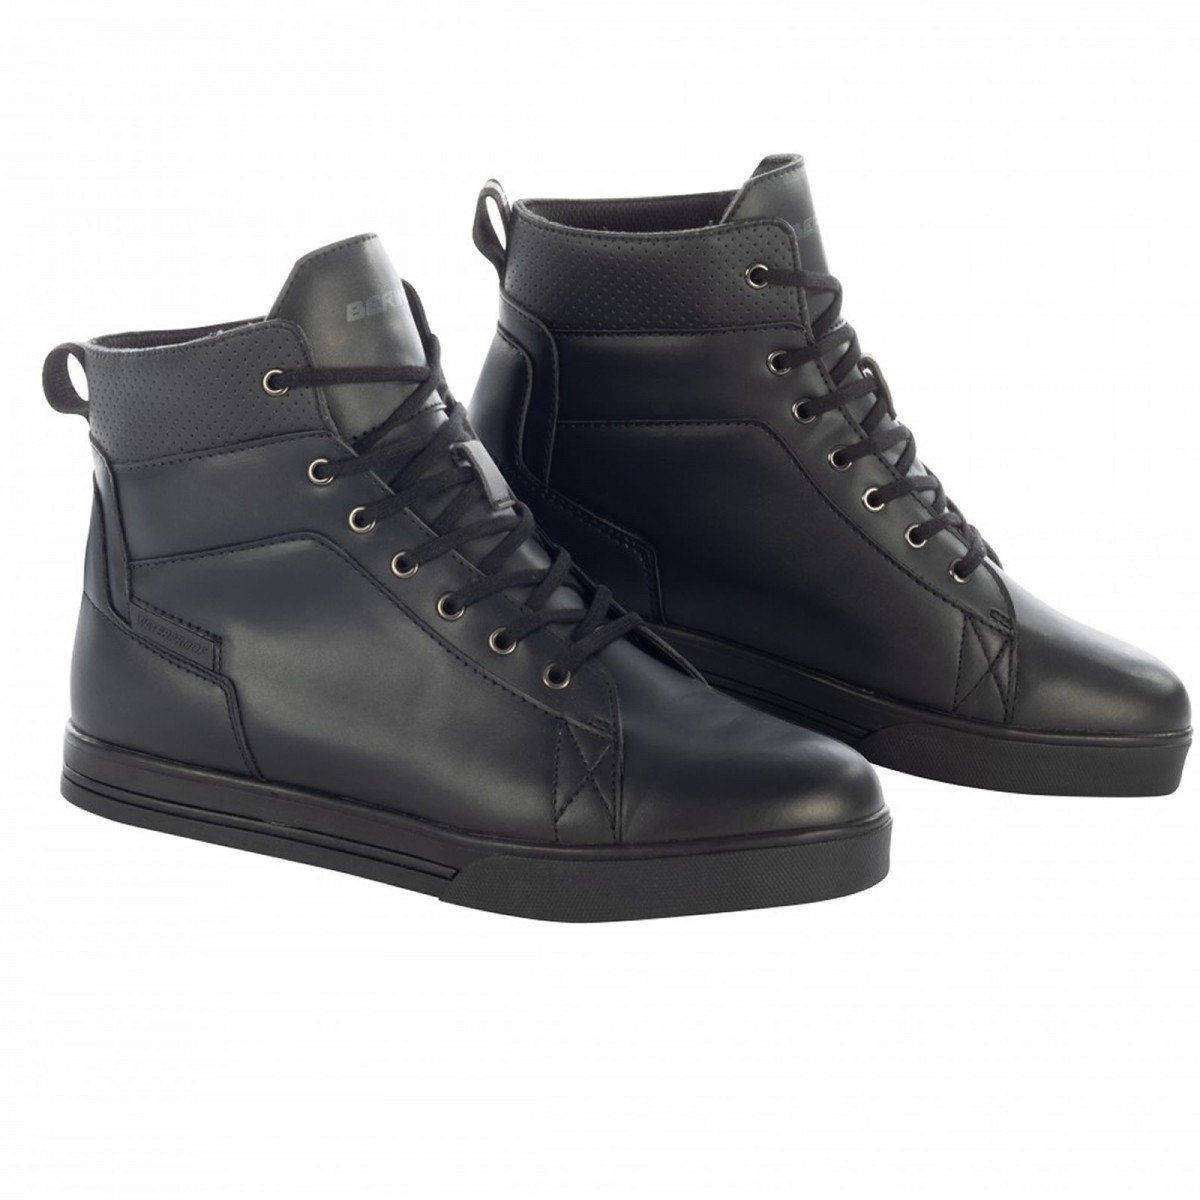 Image of Bering Sneakers Indy Black Talla 45